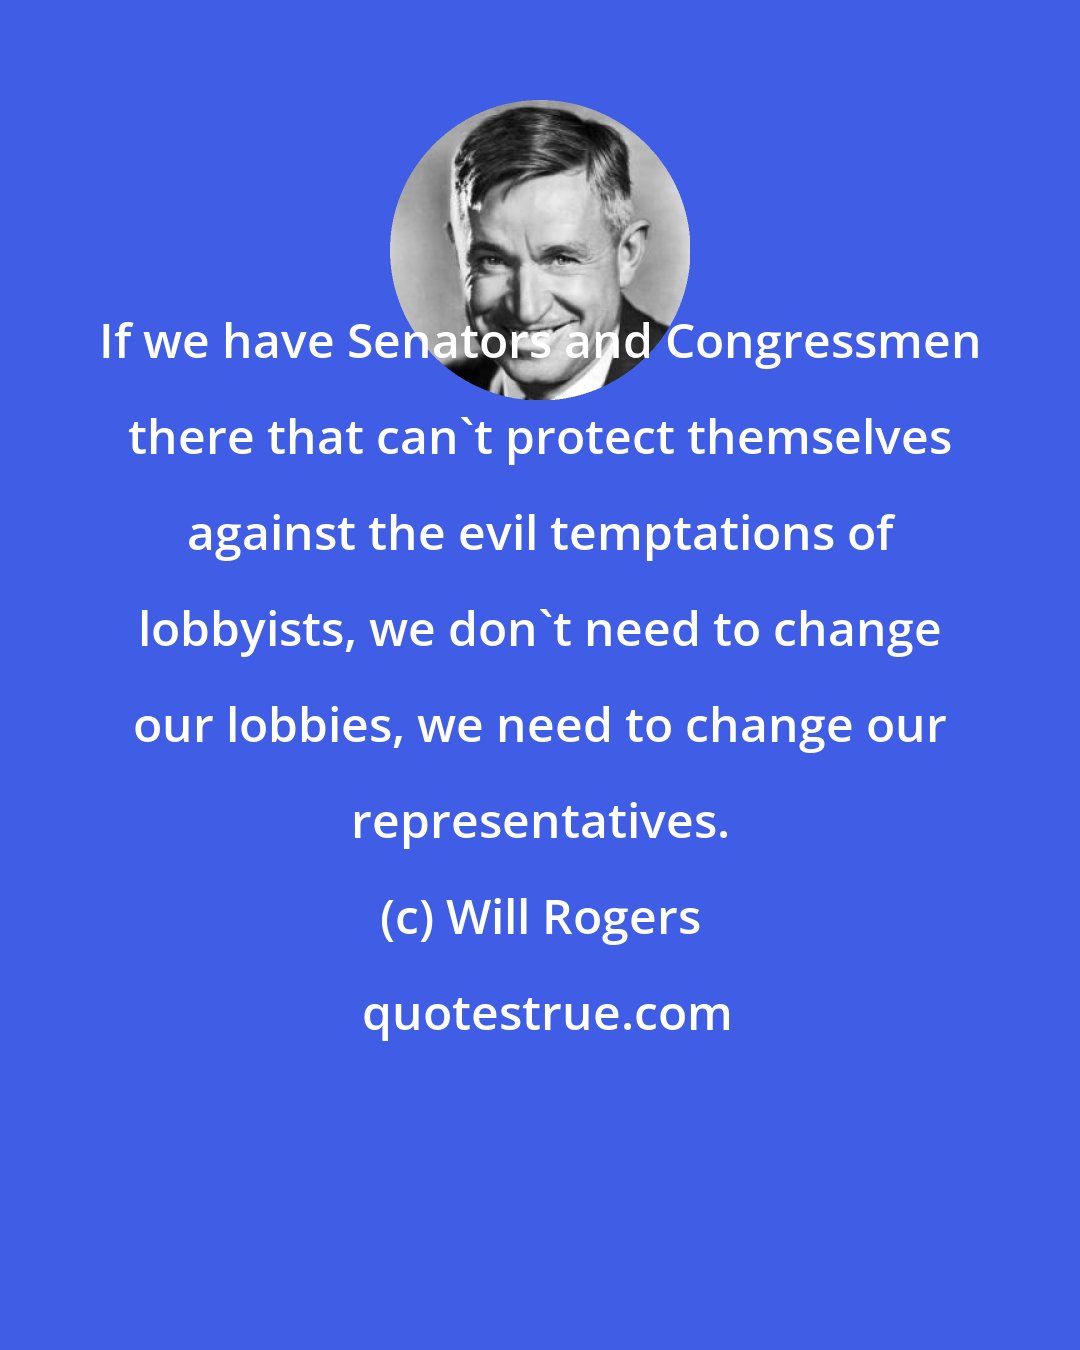 Will Rogers: If we have Senators and Congressmen there that can't protect themselves against the evil temptations of lobbyists, we don't need to change our lobbies, we need to change our representatives.